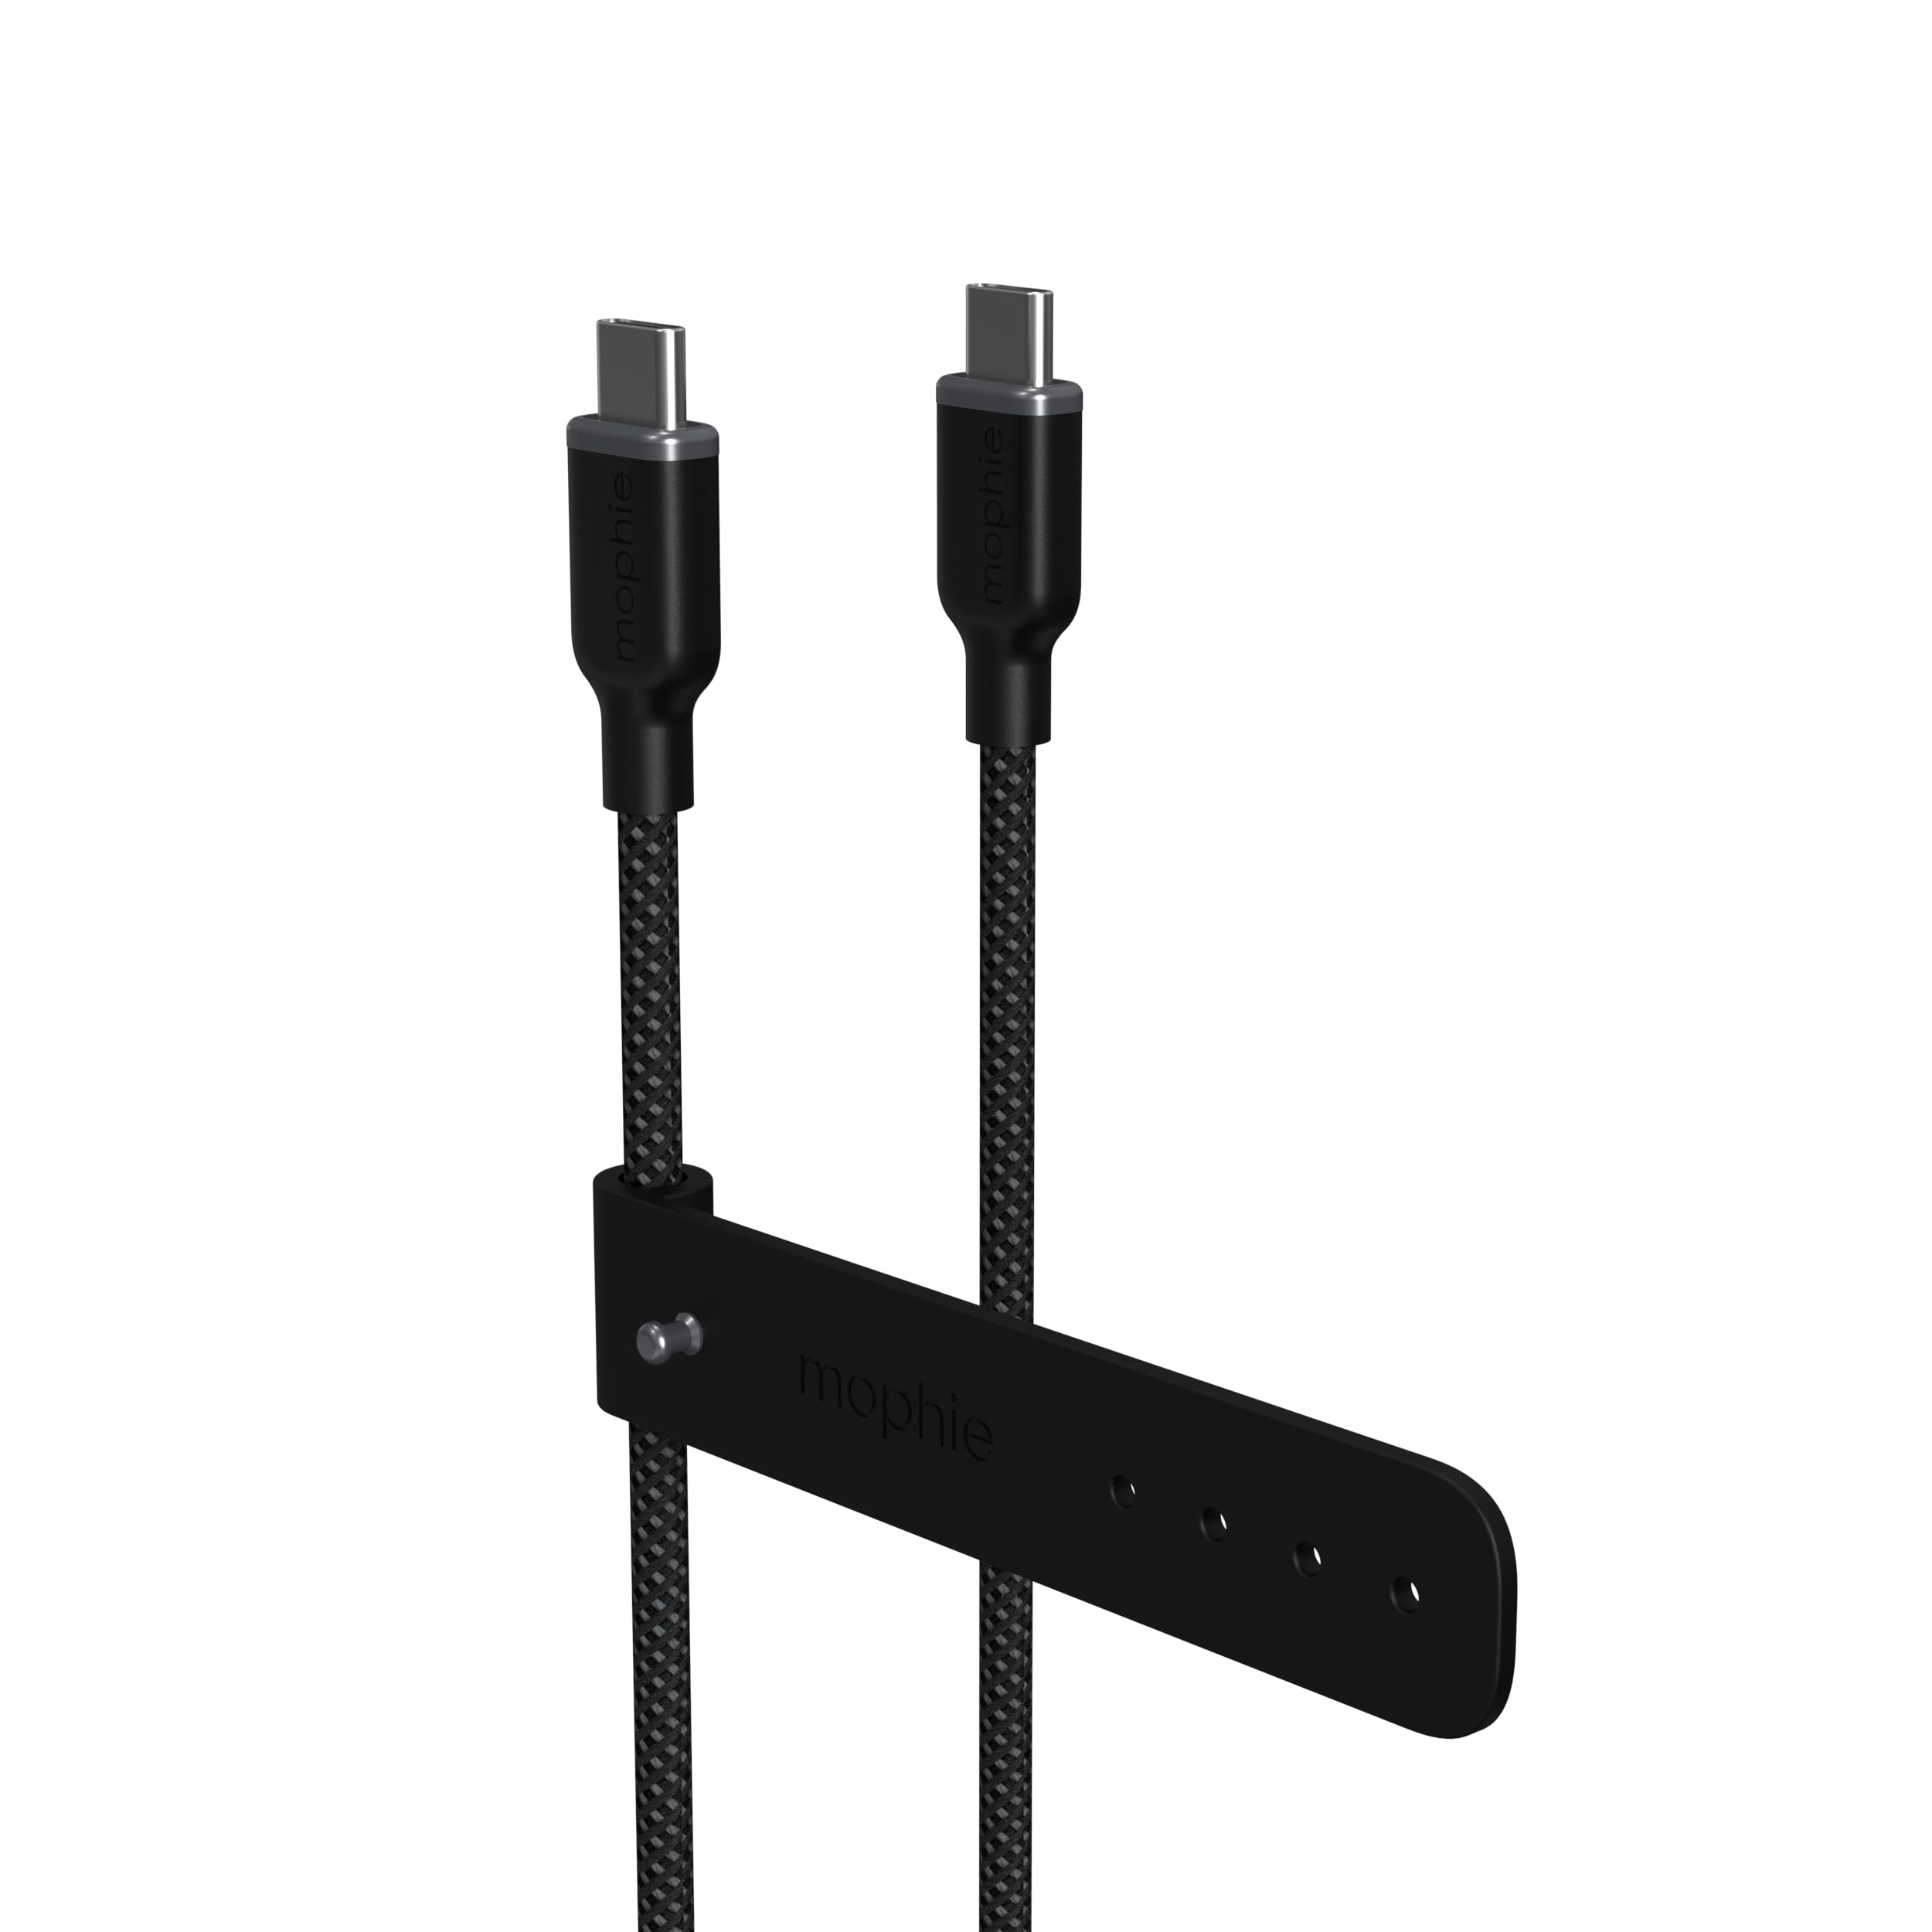 mophie Charge Stream USB-C to USB-C 2m/6ft Cable - 60W Power Delivery, Enduraflex Silicone, Ultra-Durable Braided Design for Everyday Use